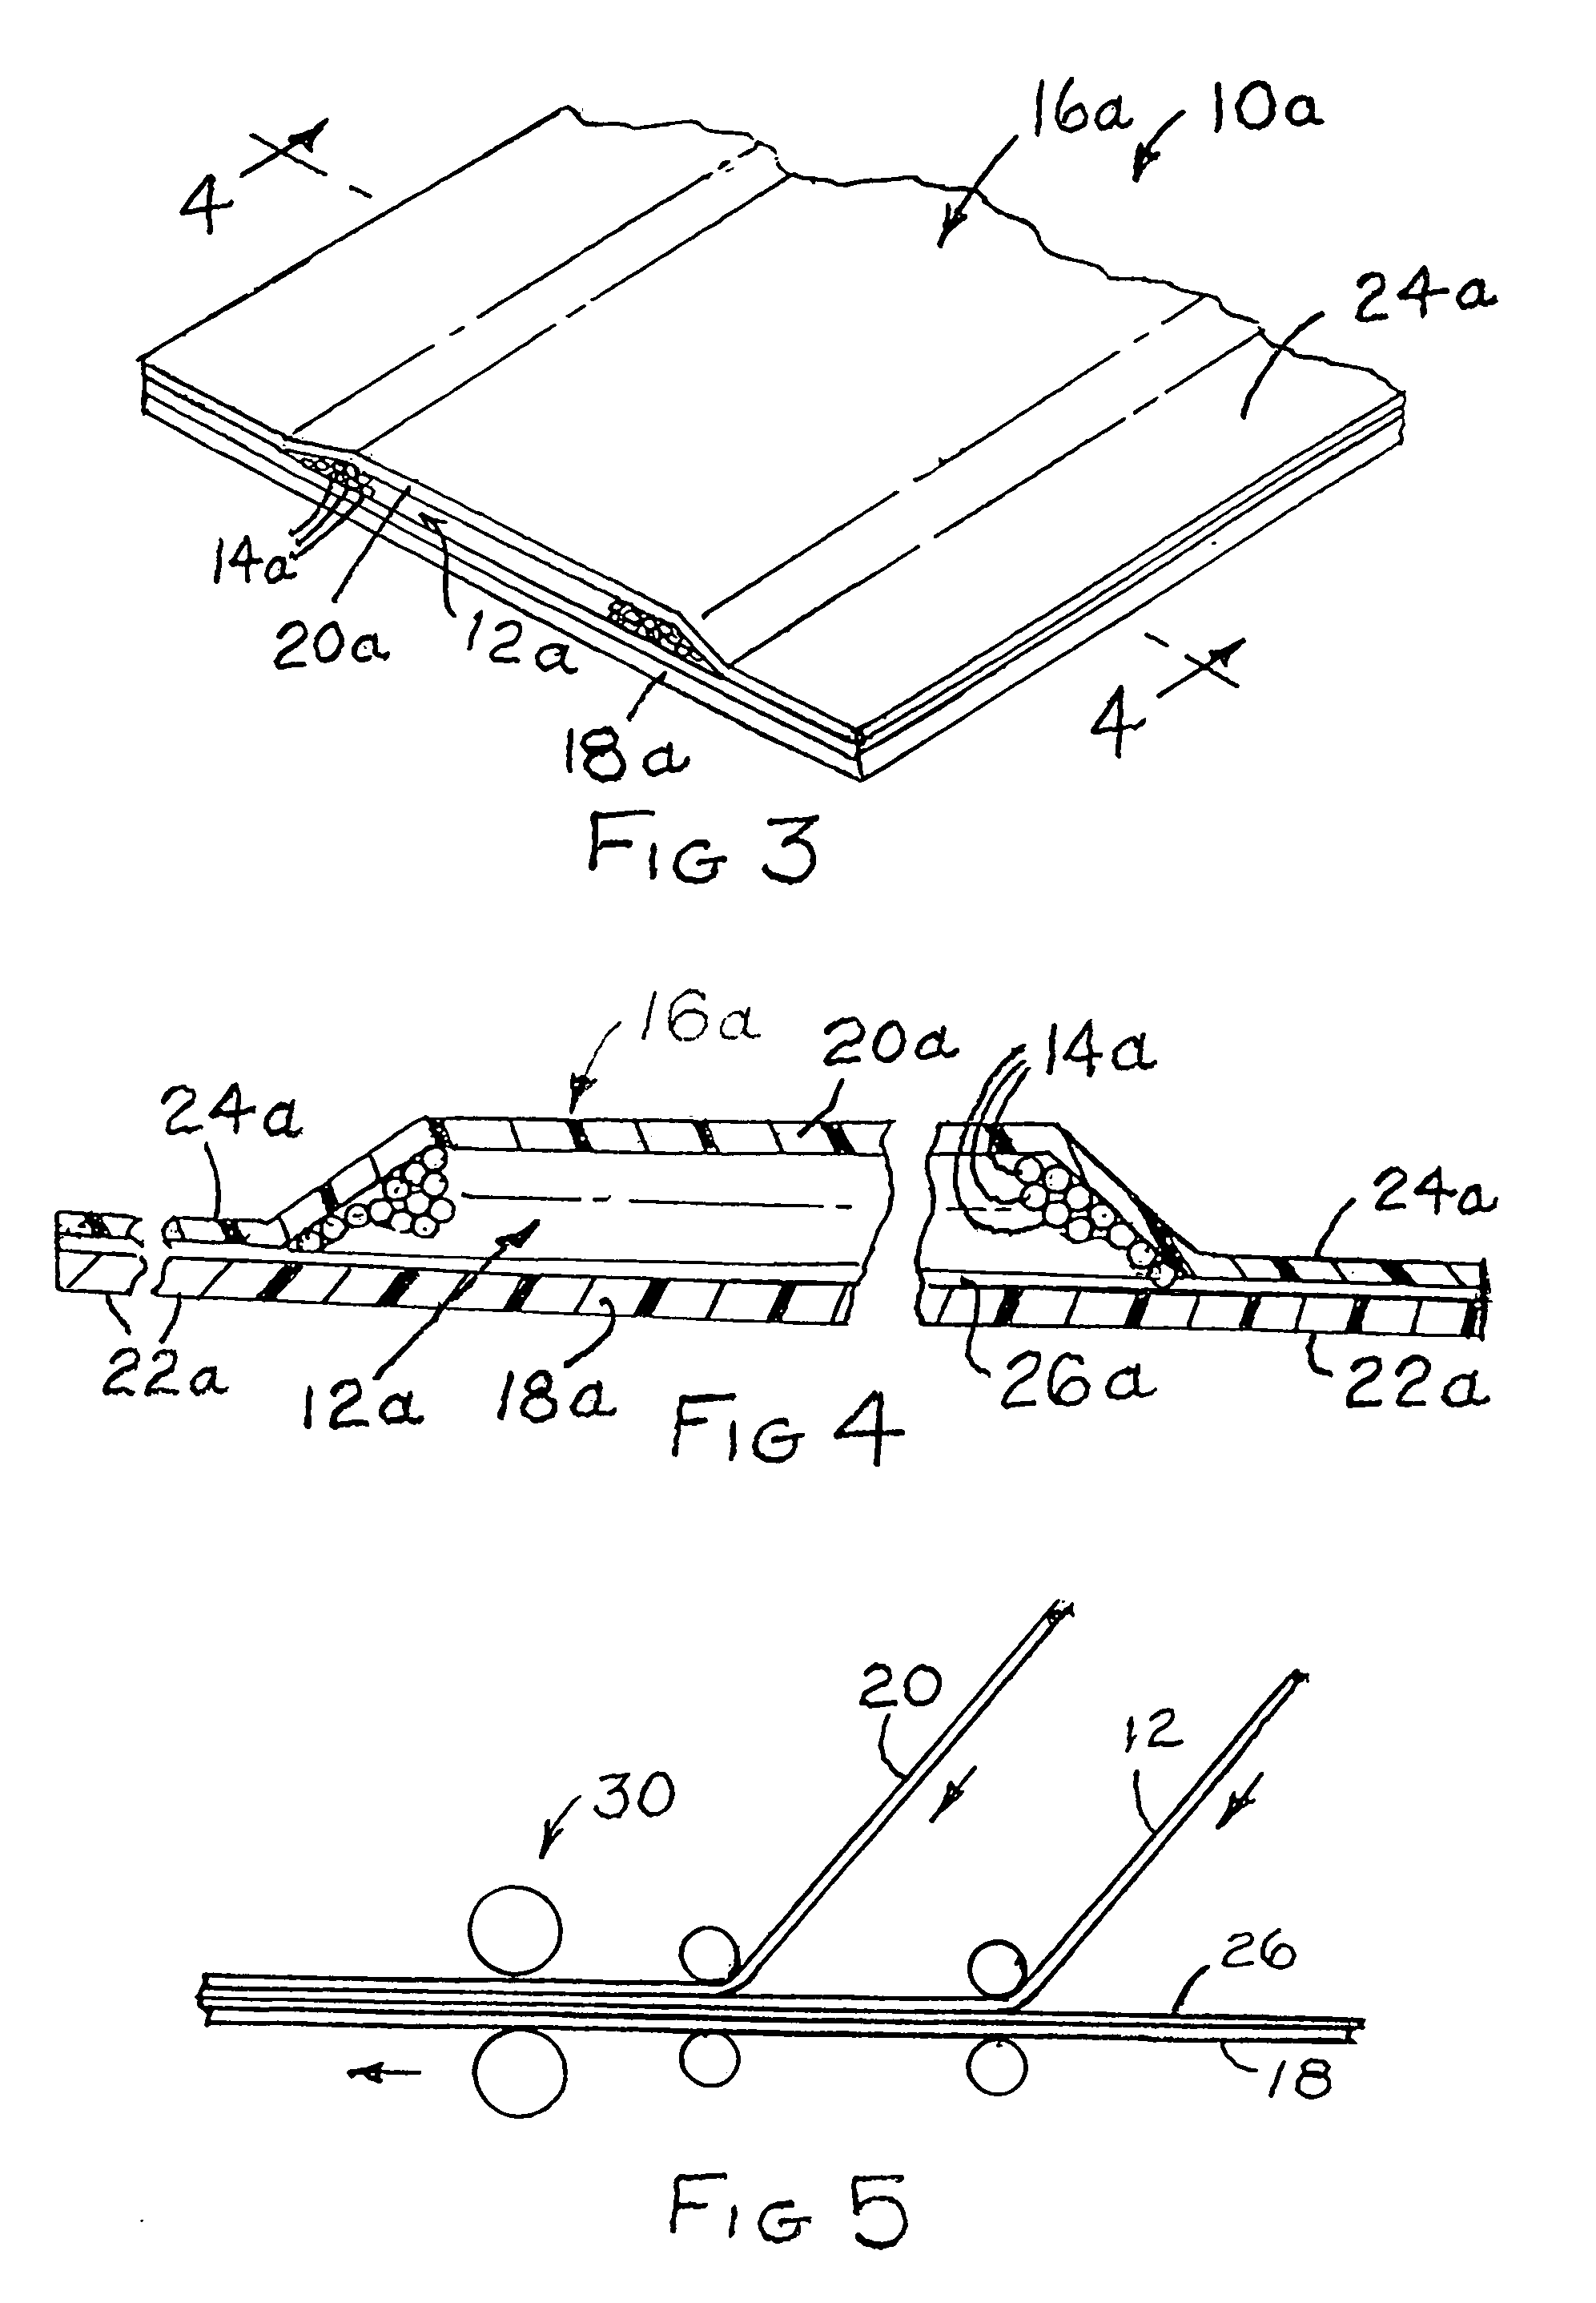 Carbon fiber heating element assembly and methods for making